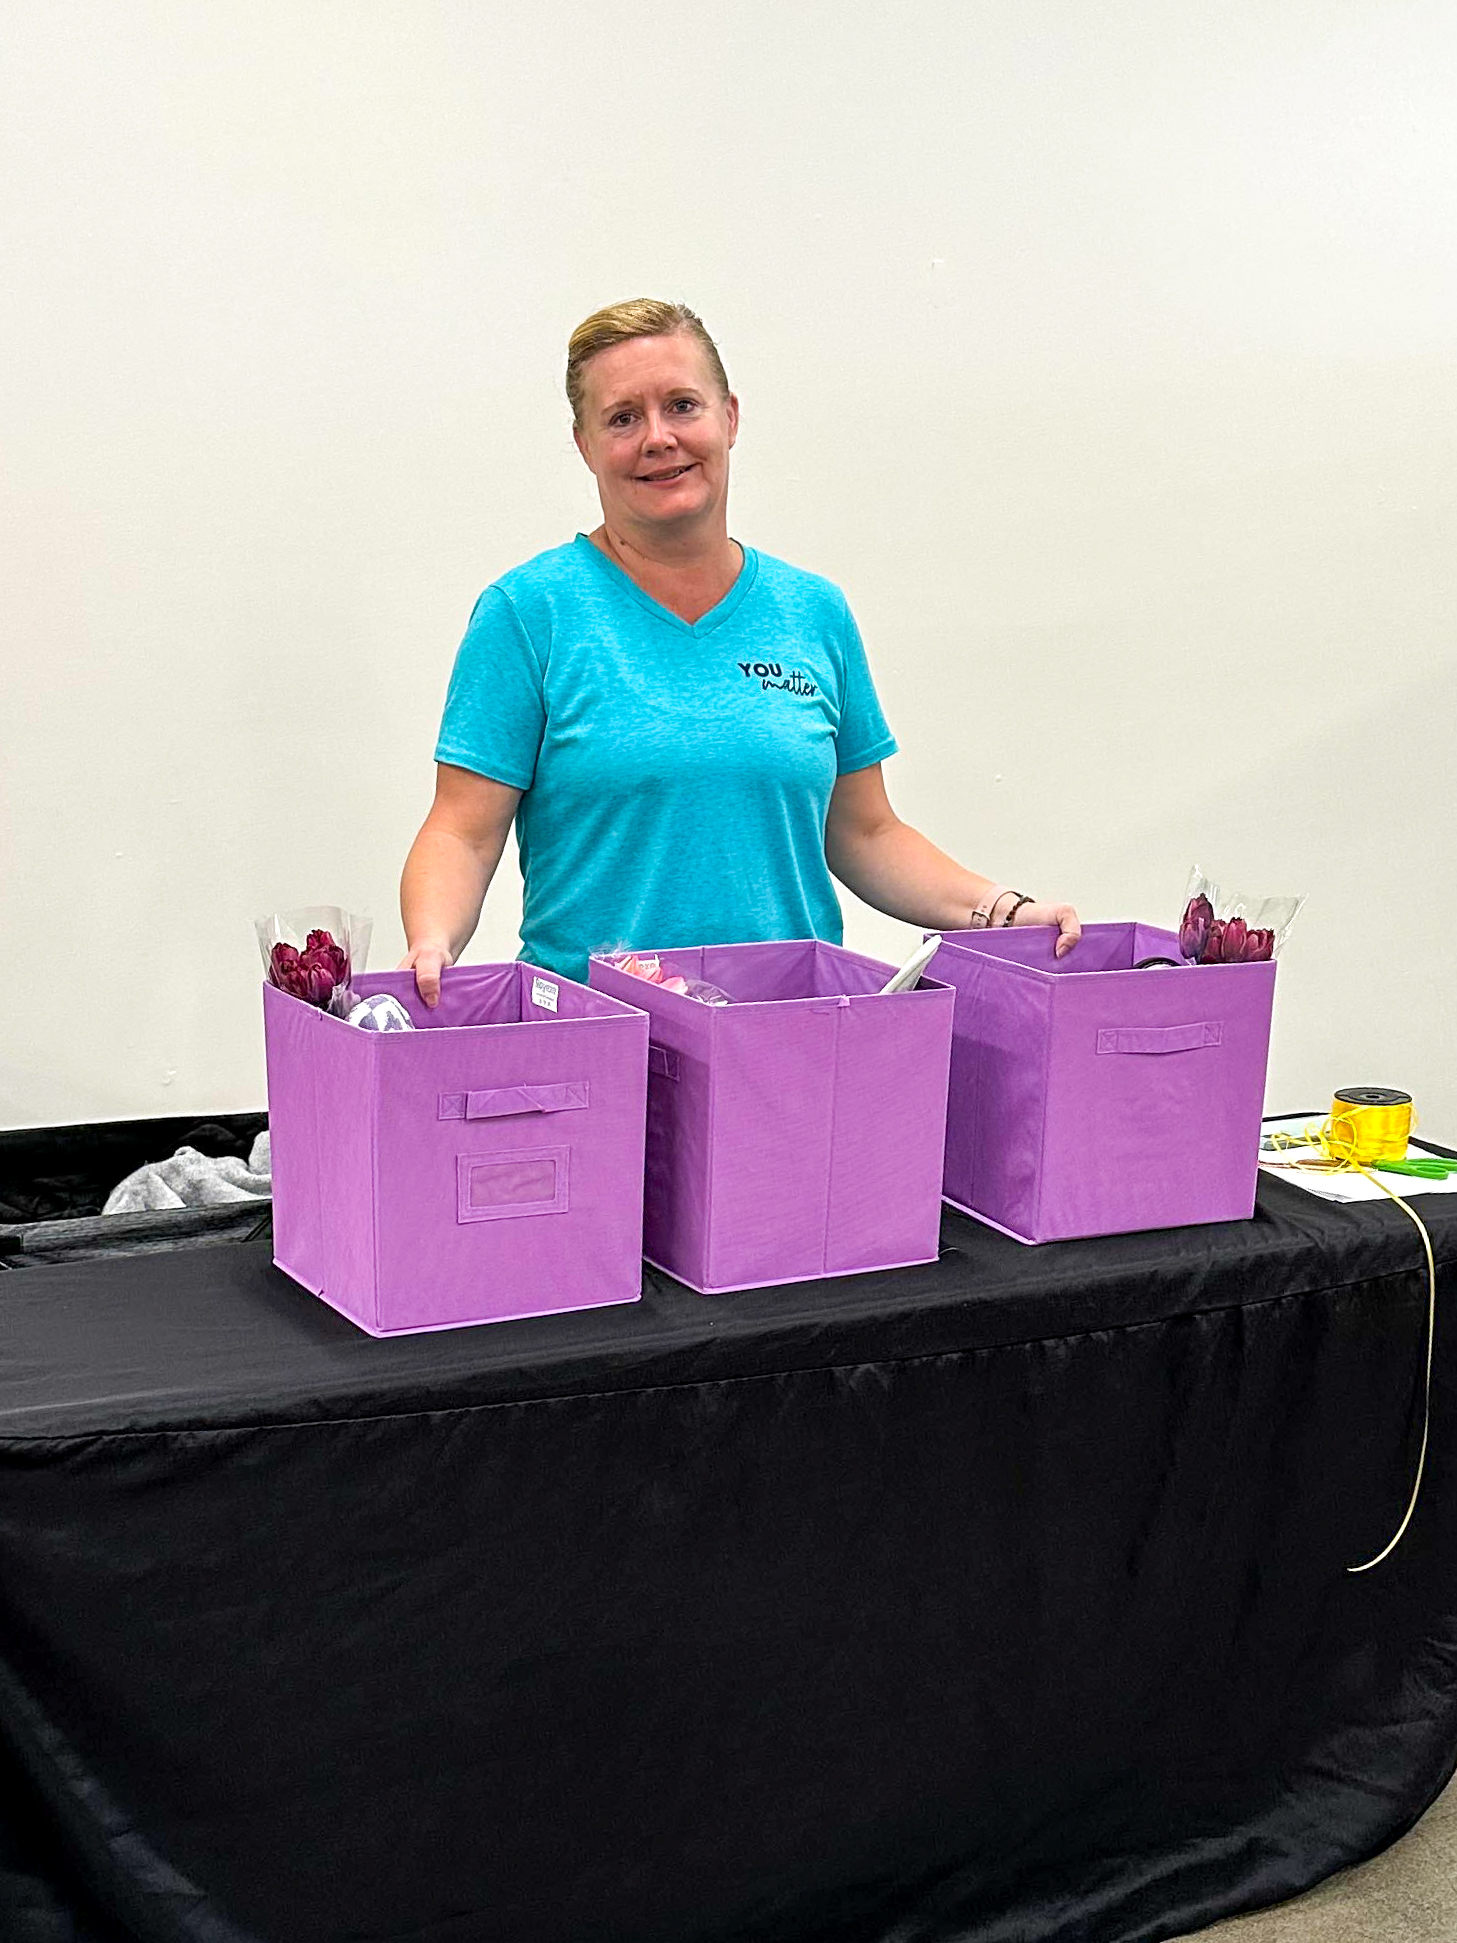 Woman in blue t-shirt poses behind three purple storage boxes. 